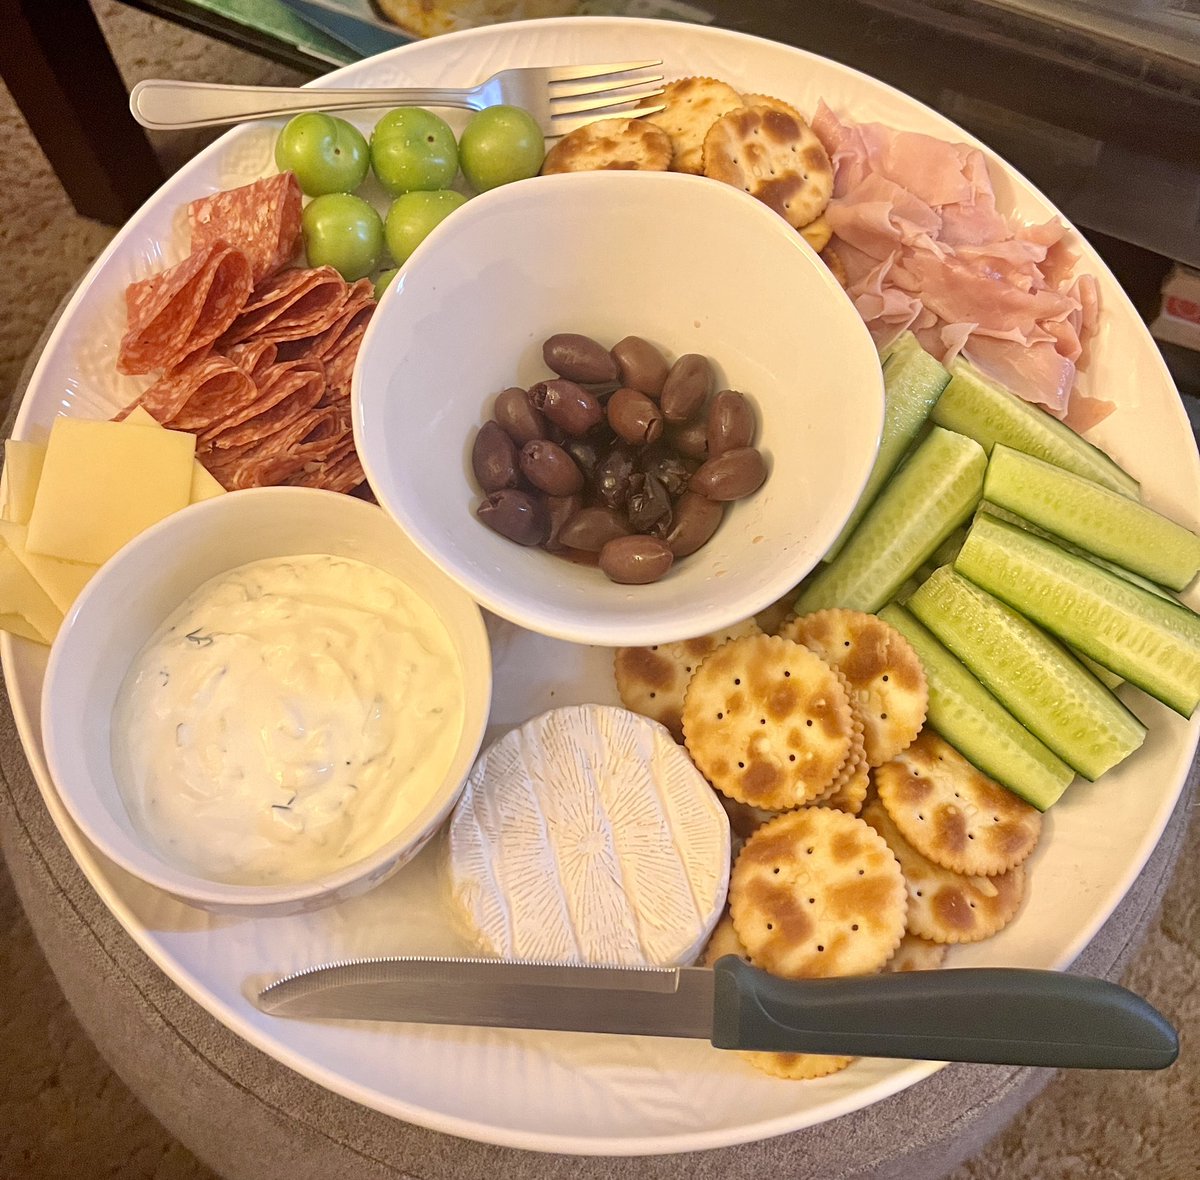 I know it’s not Saturday Platterday, but I made a platter for mum and I anyway.